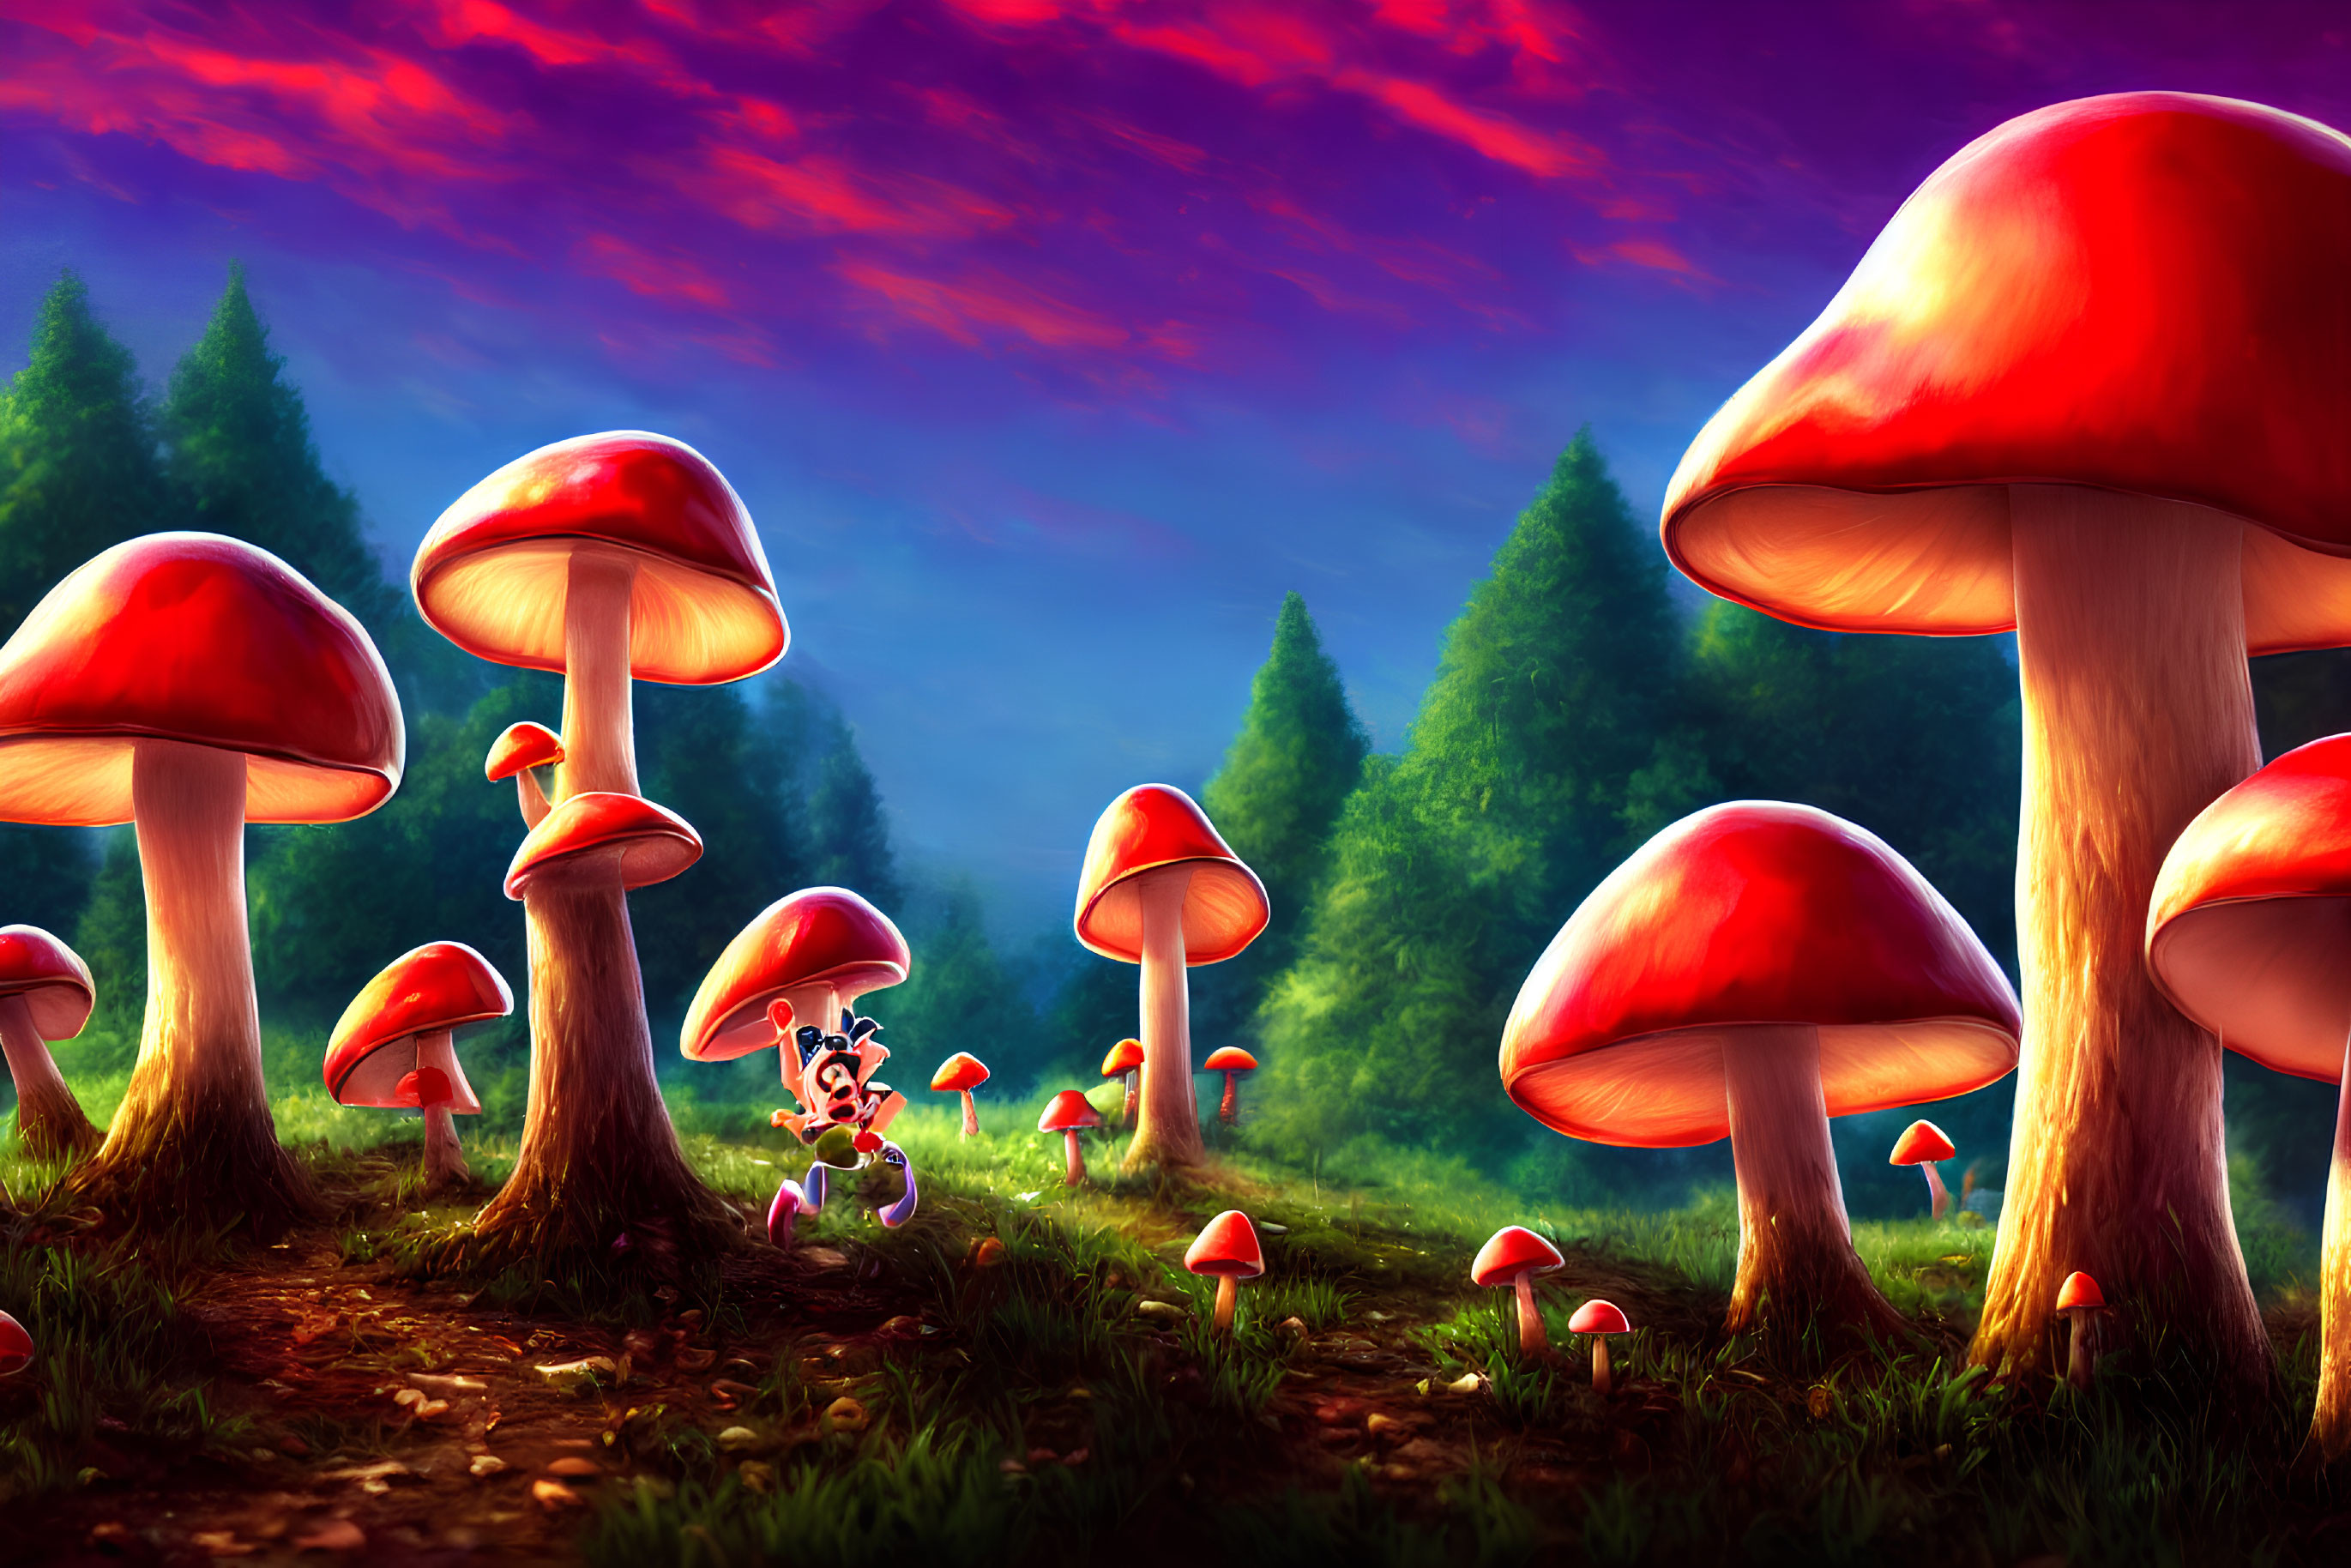 Fantasy forest with red mushrooms and whimsical character under purple sky